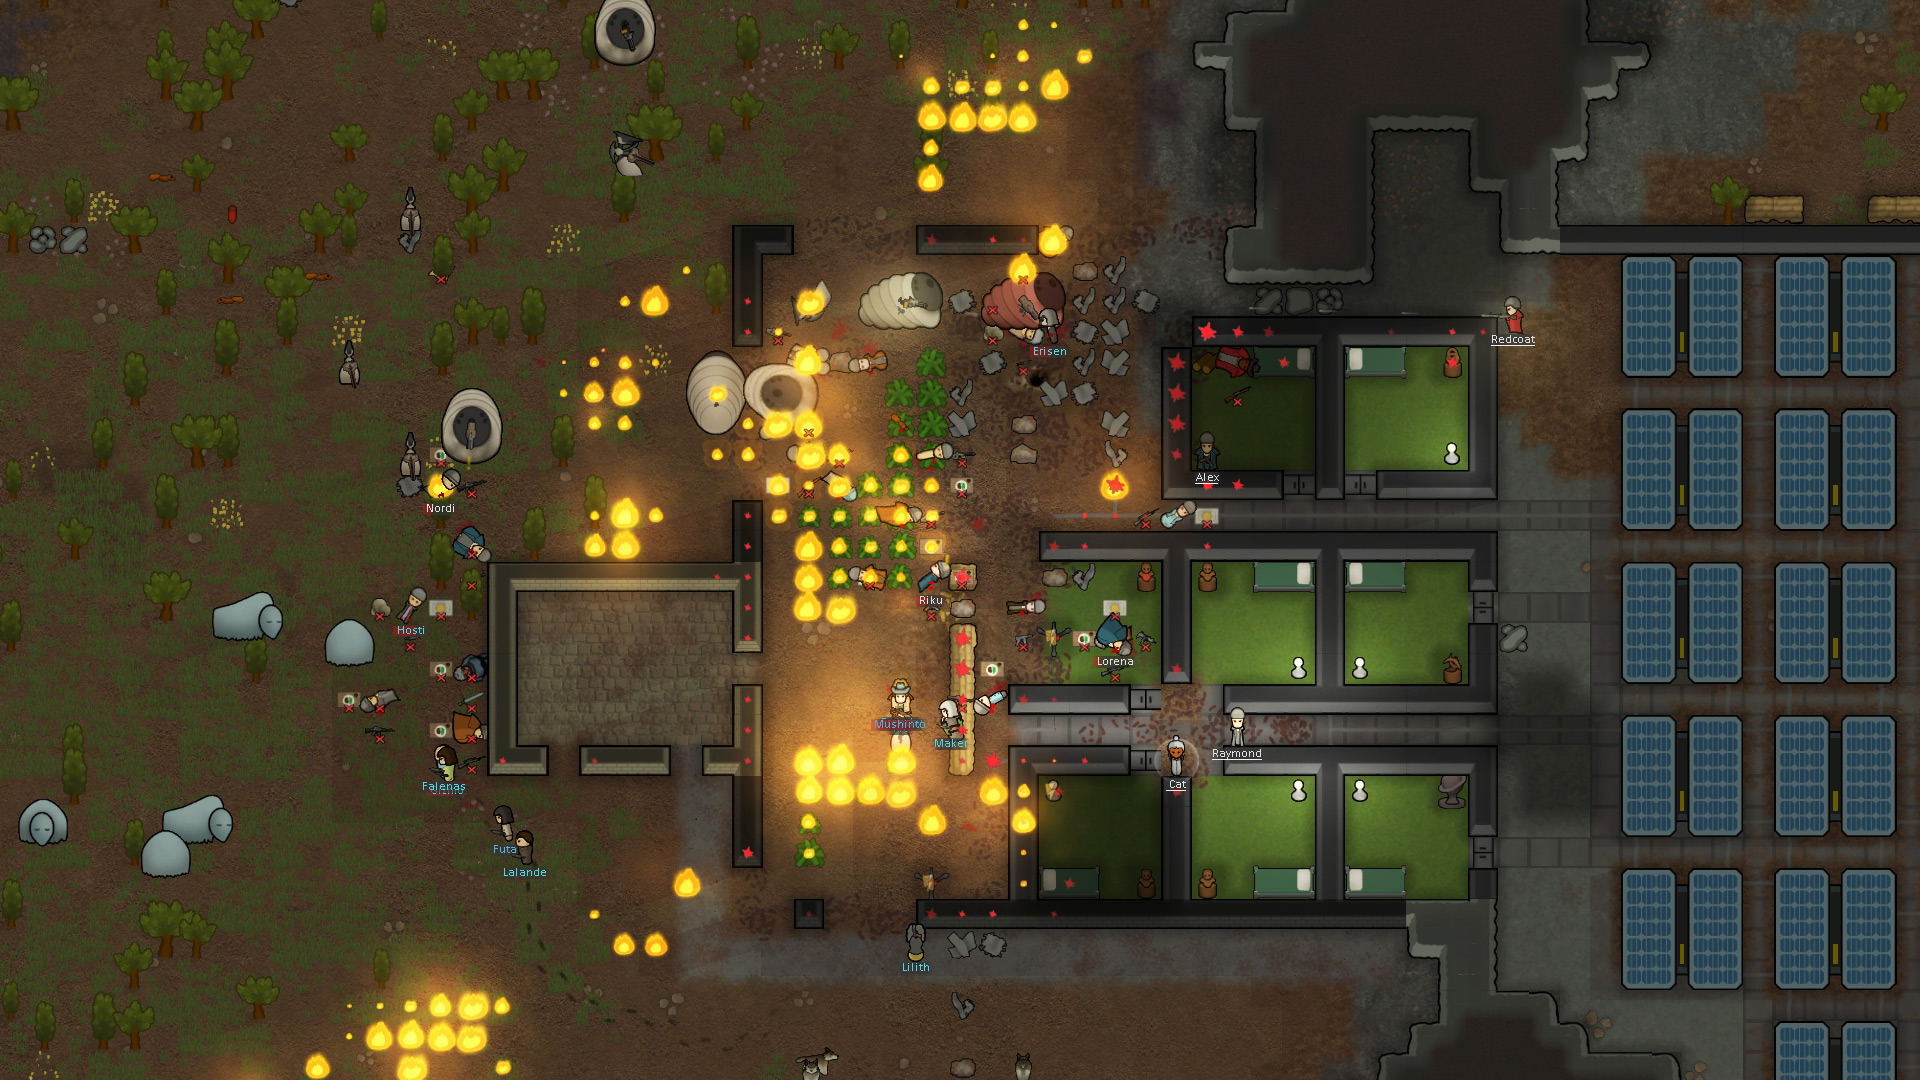 Tips For Getting Started In RimWorld